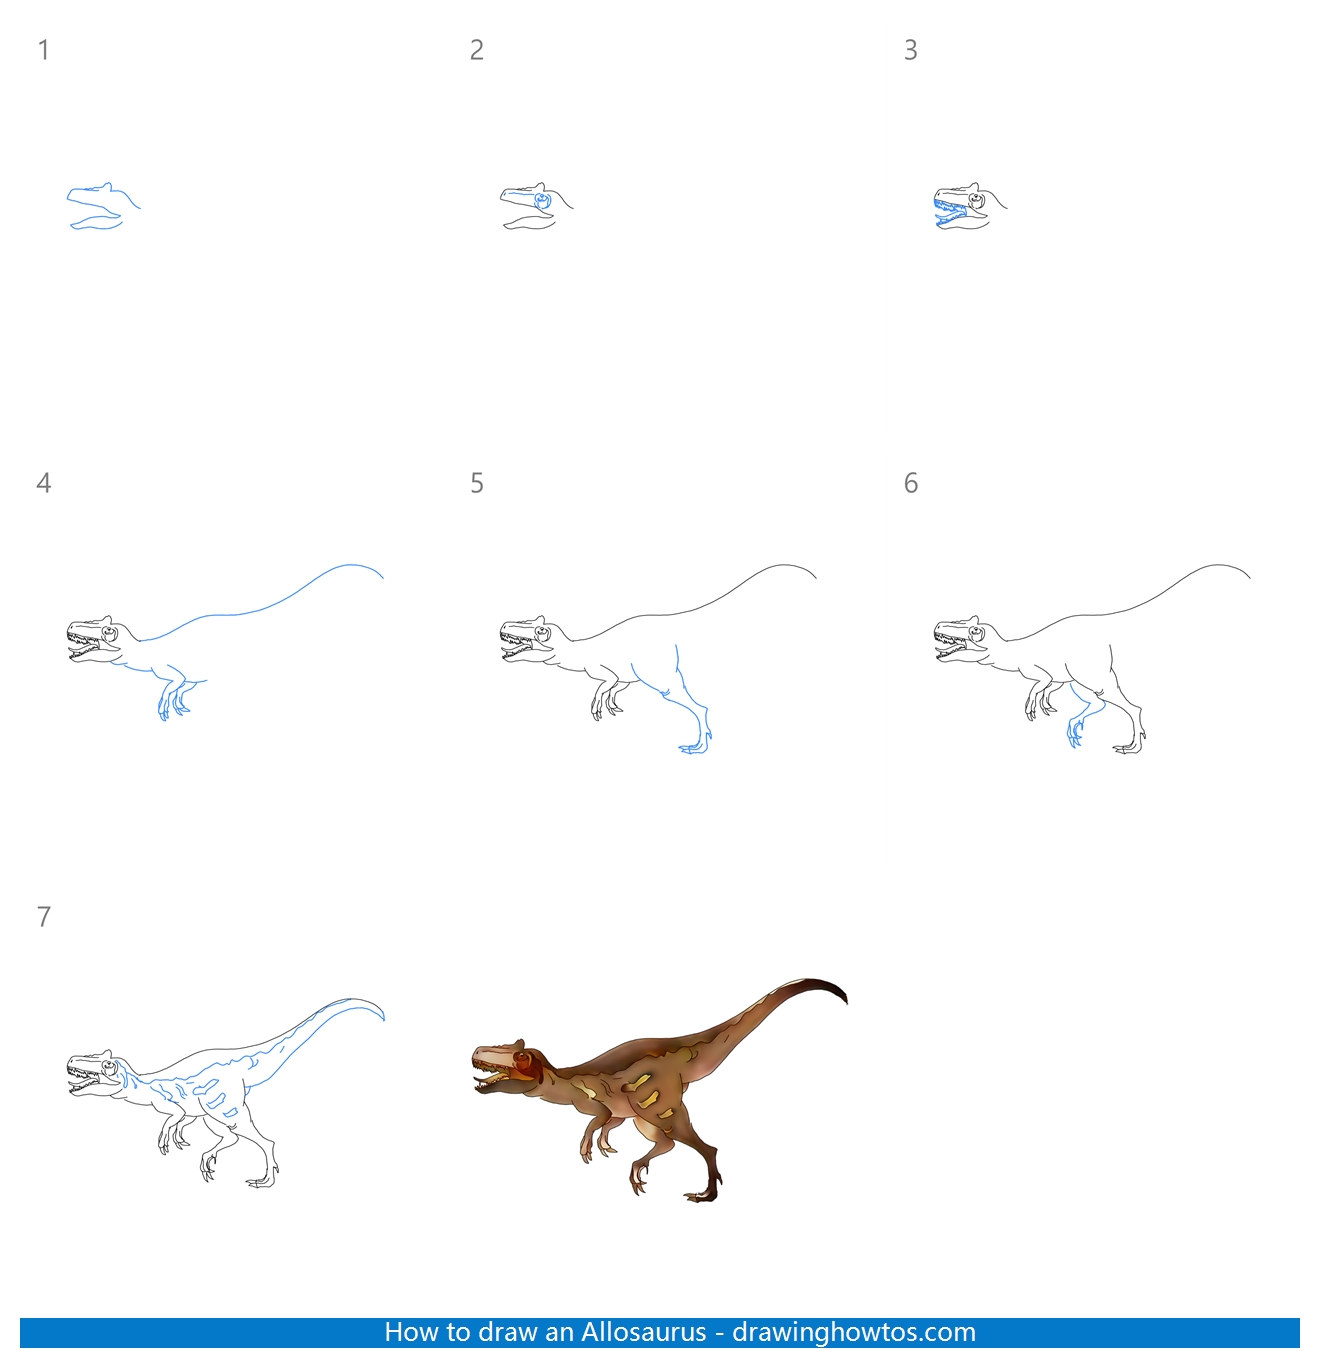 How to Draw an Allosaurus Step by Step